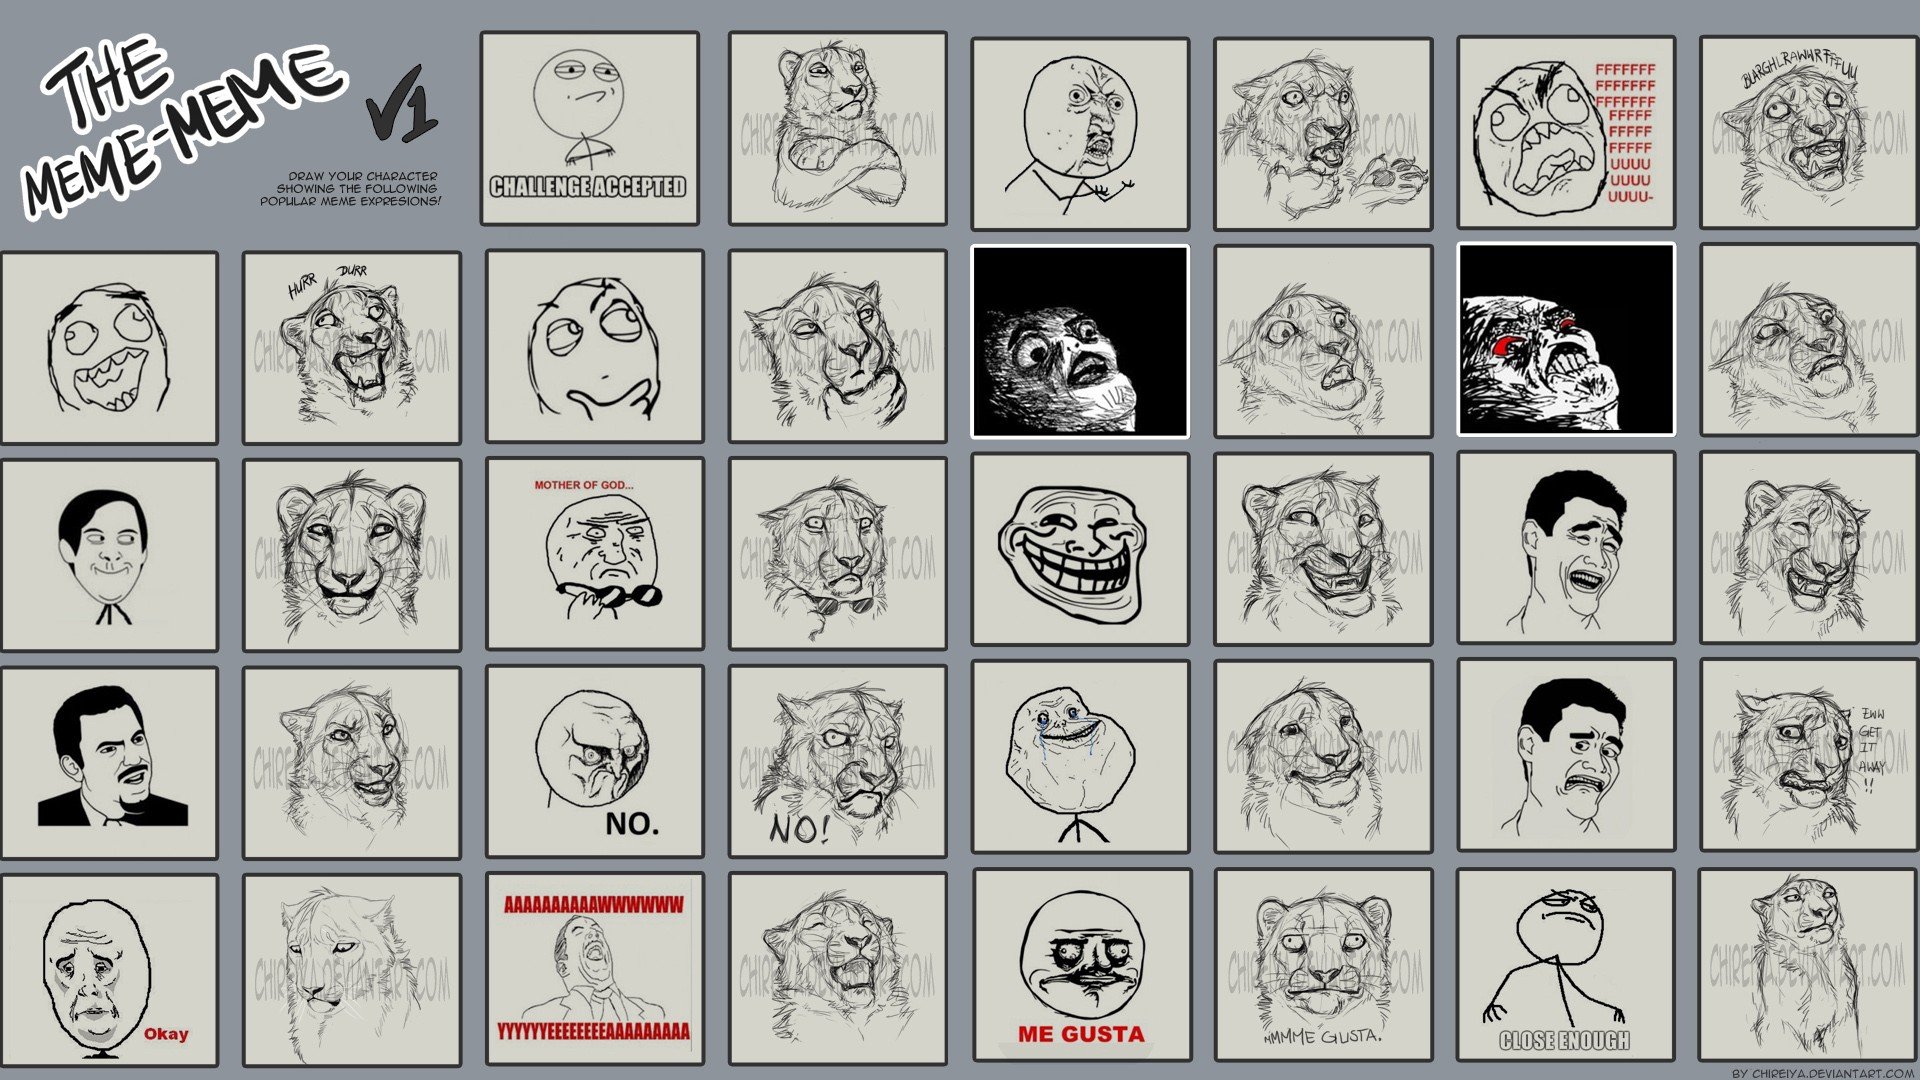 tigers, Funny, Meme, Rage, Challenge, Drawings, Forever, Alone, Trolls, Faces, Face, Expressions, Me, Gusta, Rageface, Y, U, No, Guy, Mother, Of, God Wallpaper